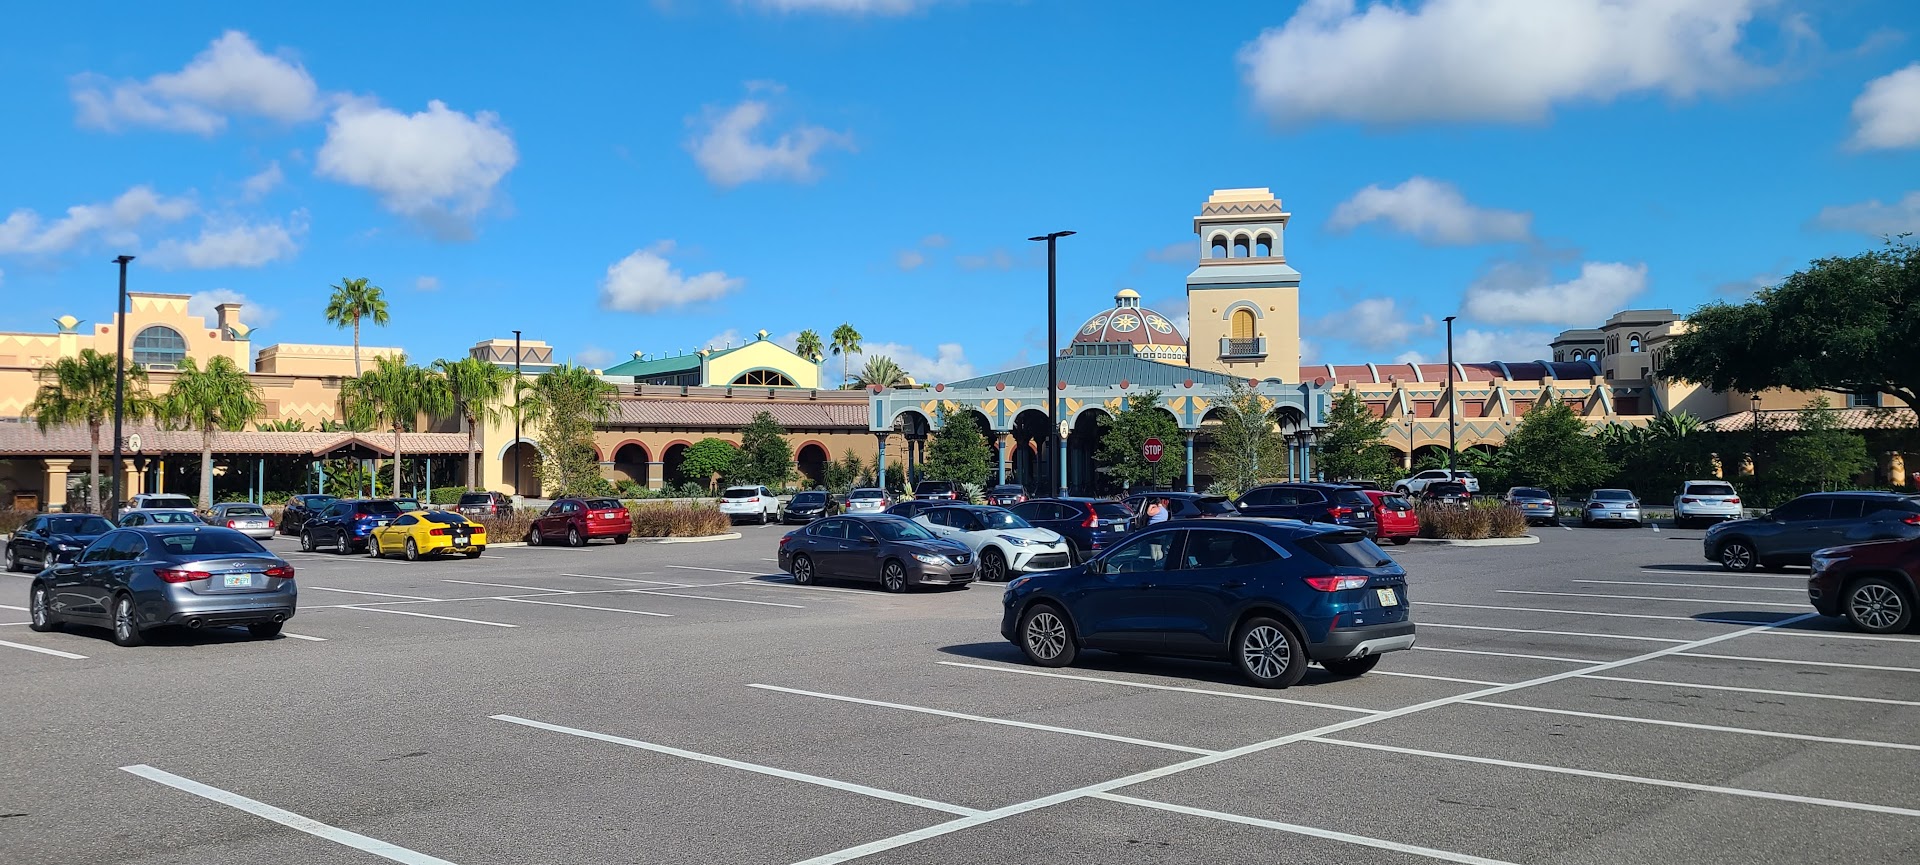 Can I Park At A Disney Resort Without Staying There? Where To Park? Tips 4